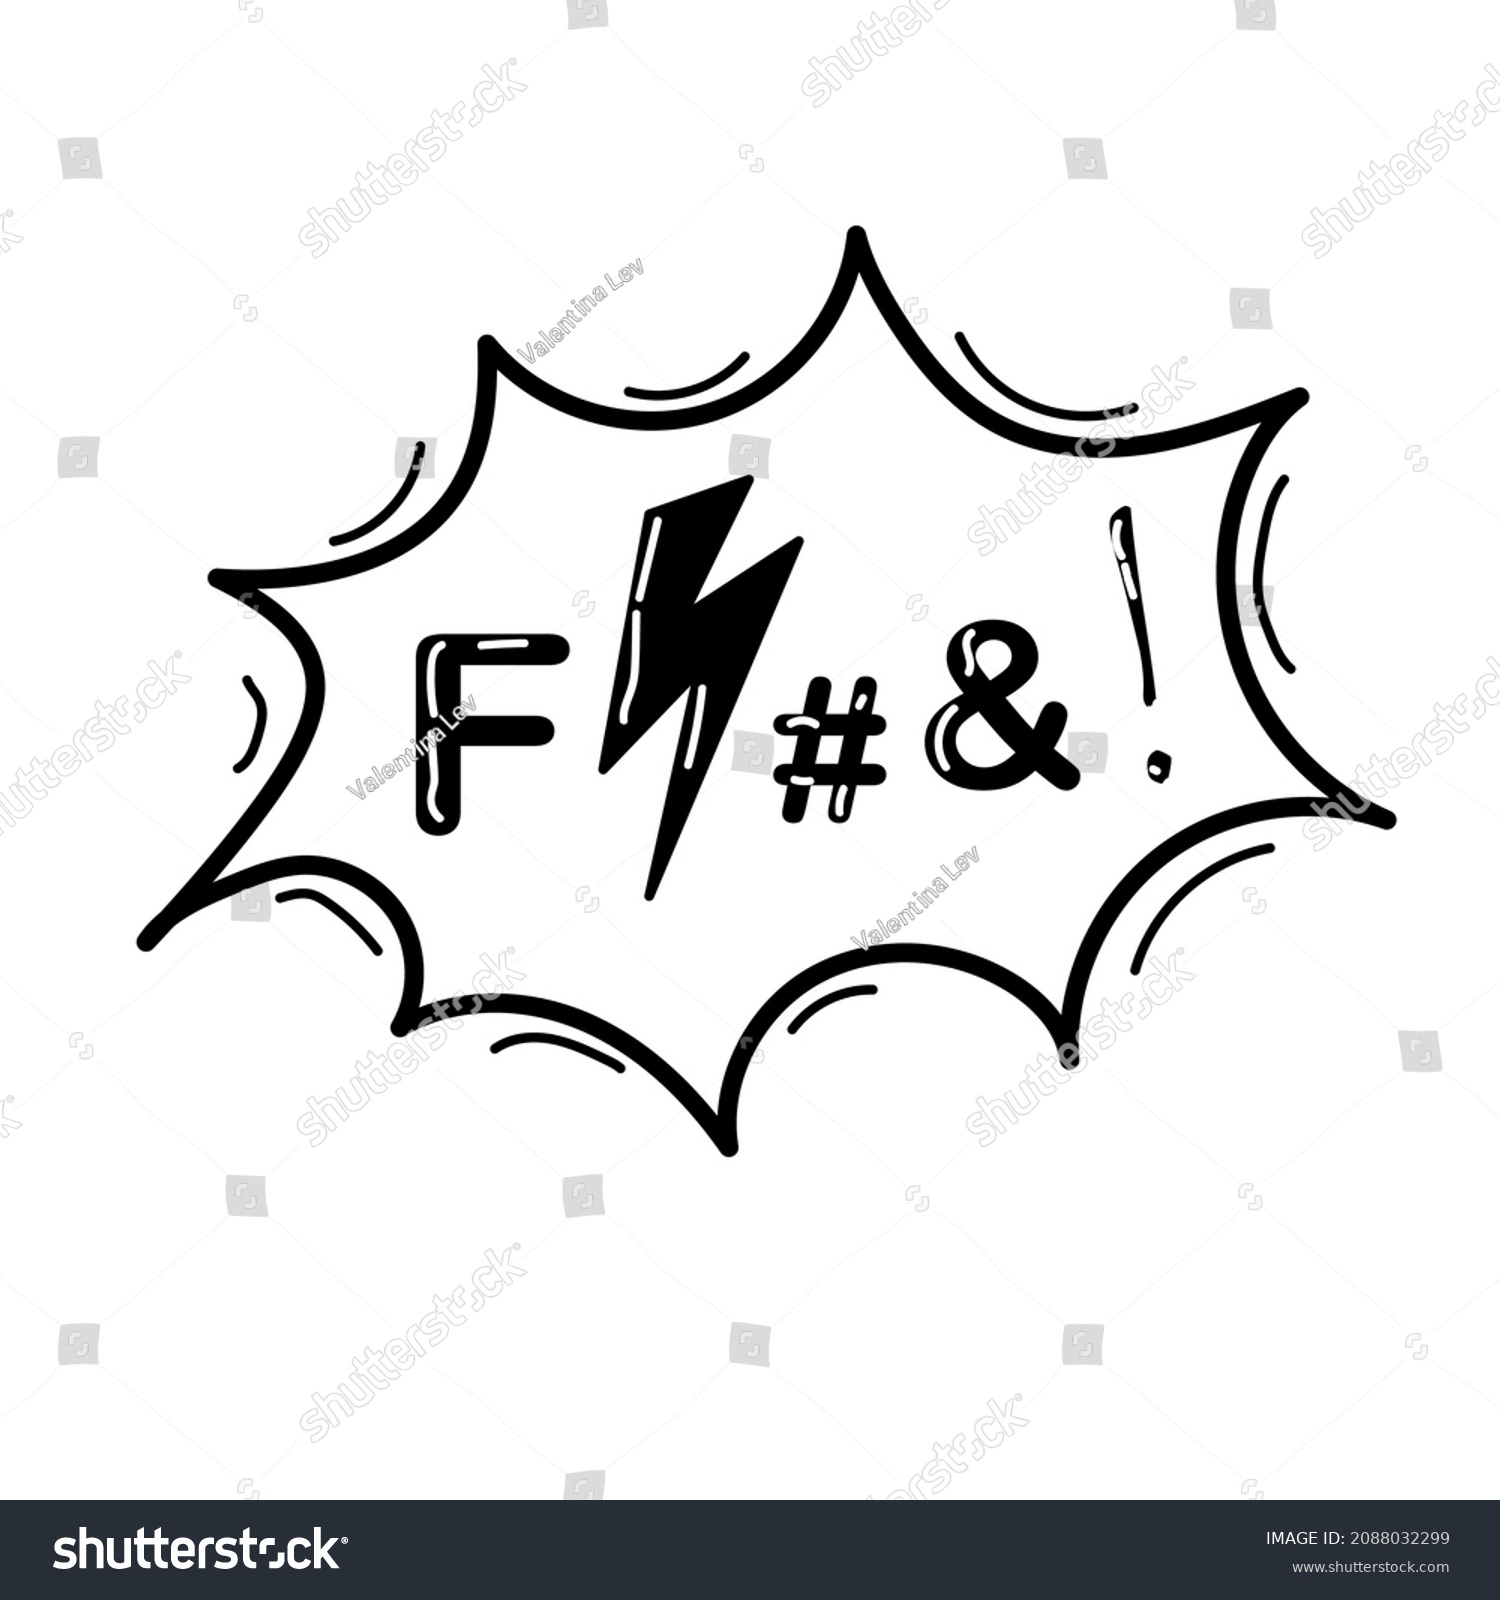 Swear Word Angry Speech Bubble Curse Stock Vector Royalty Free 2088032299 Shutterstock 